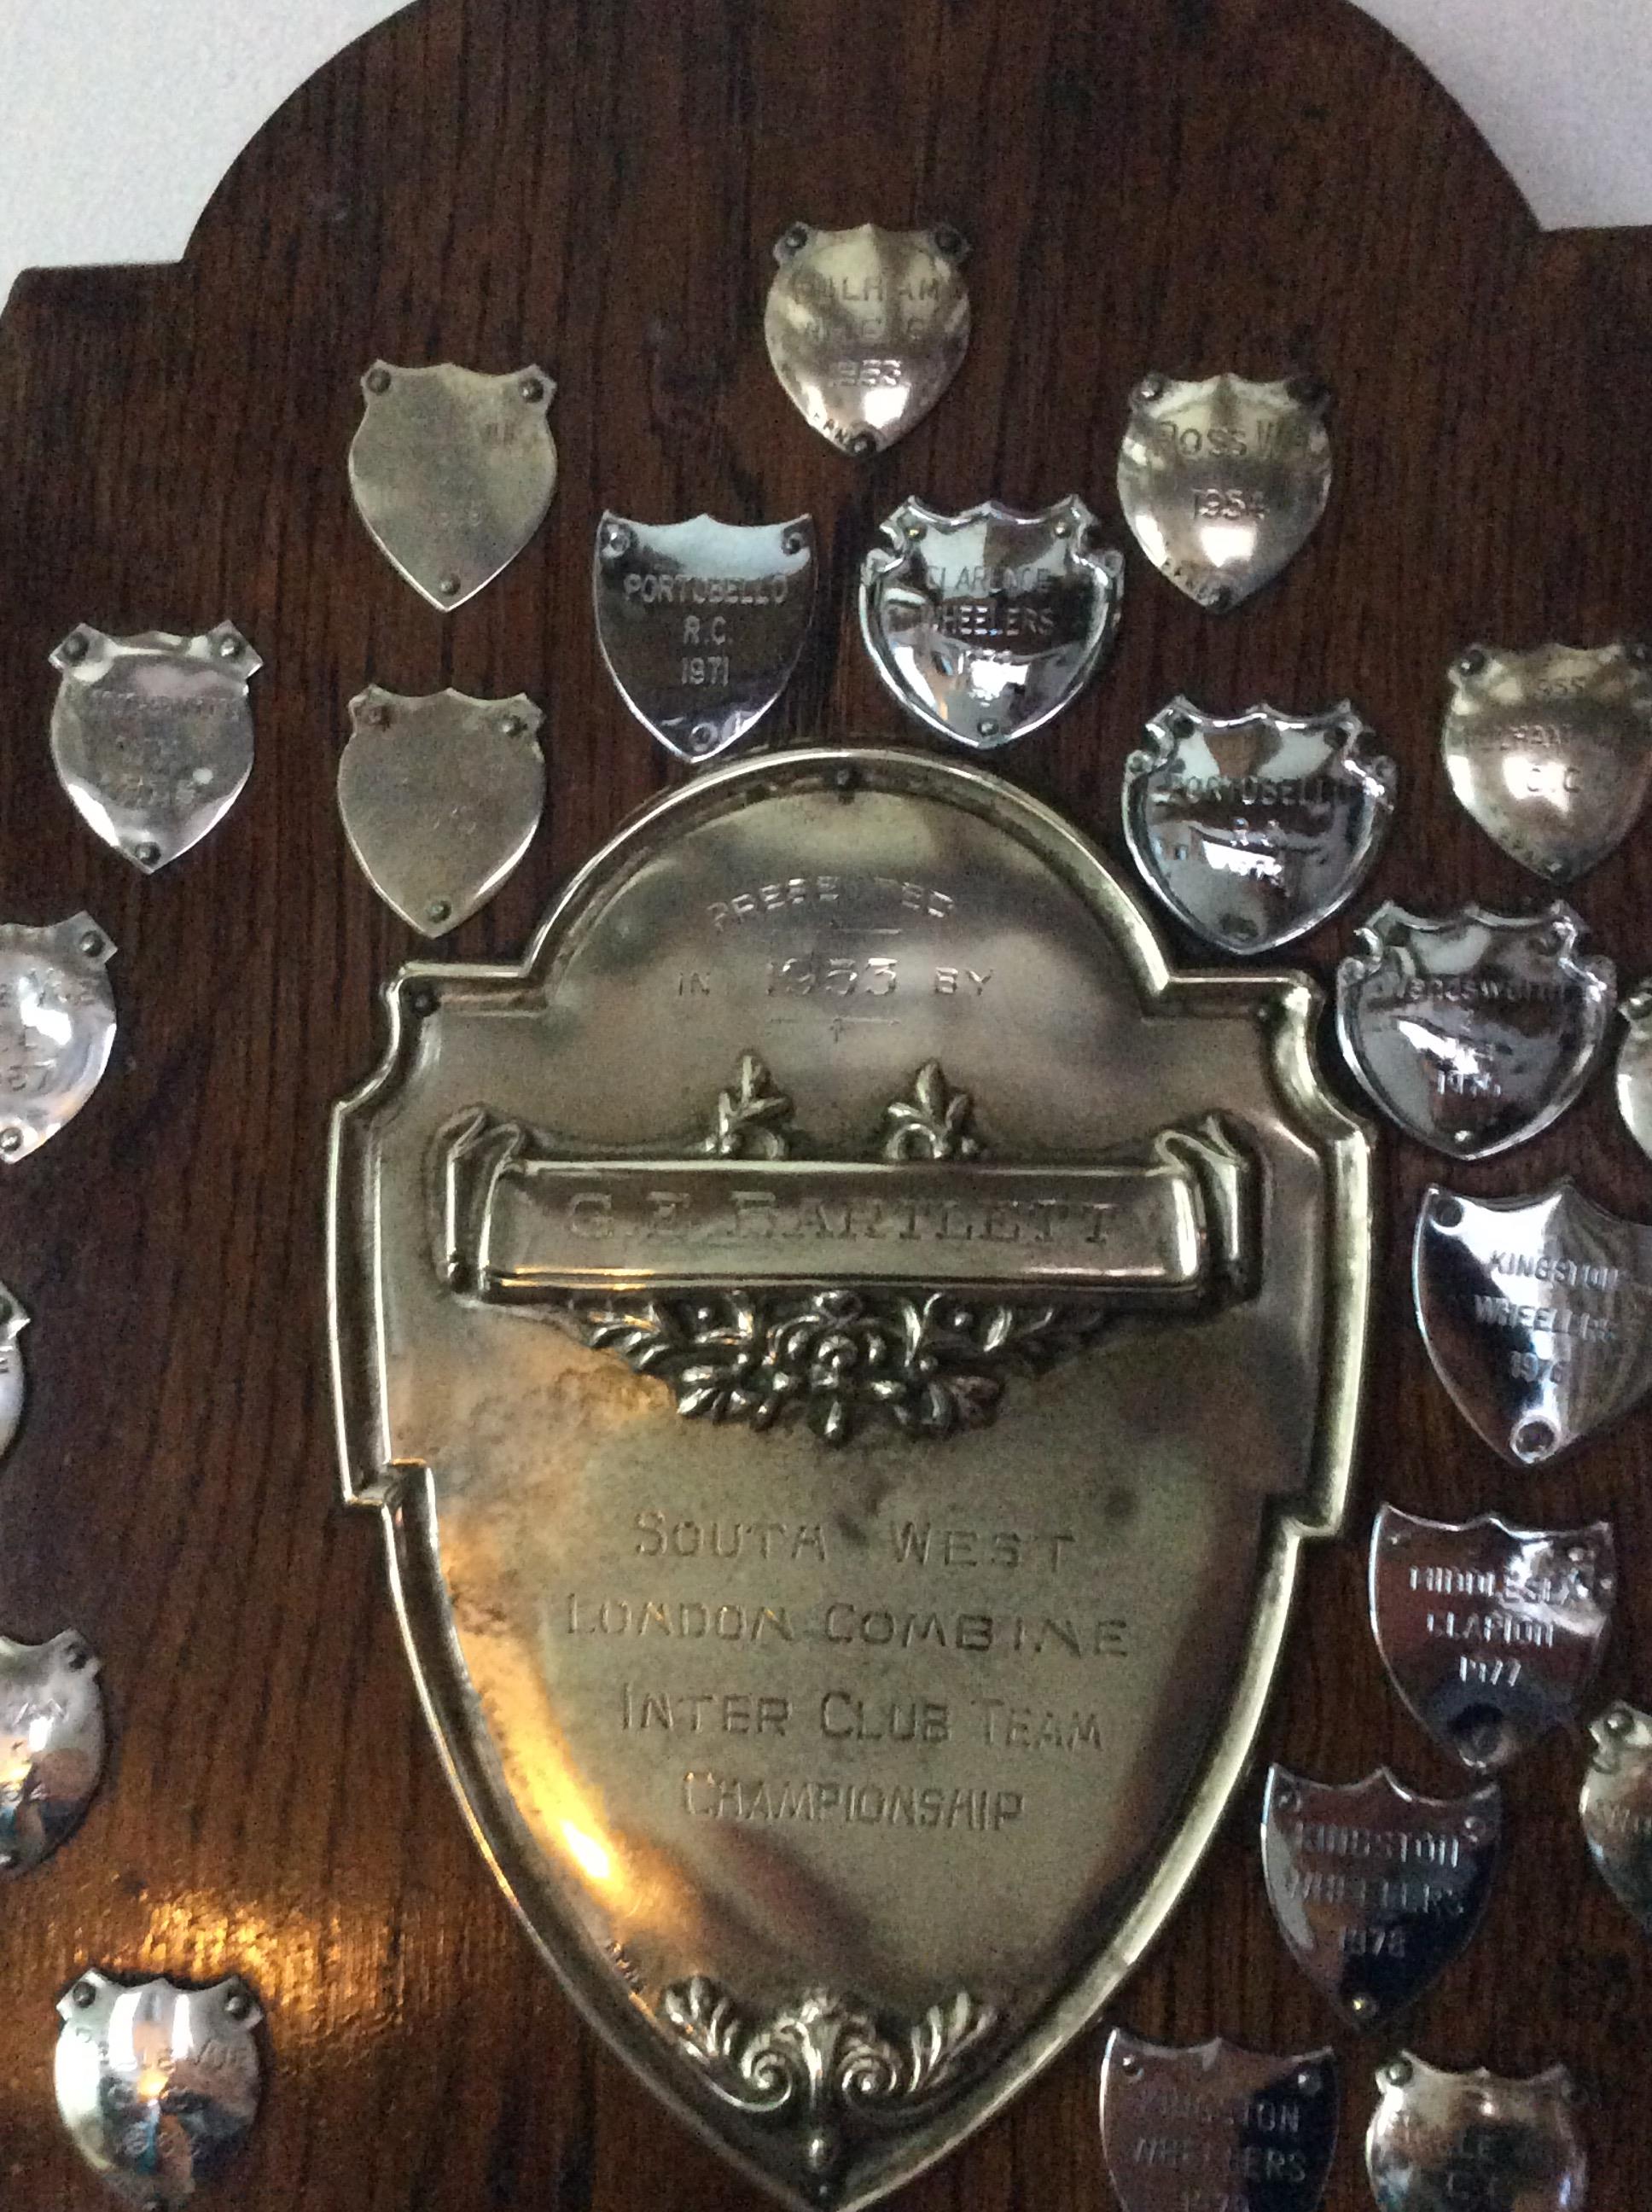 Large 1953 London Cycling Trophy Shield - Image 2 of 8